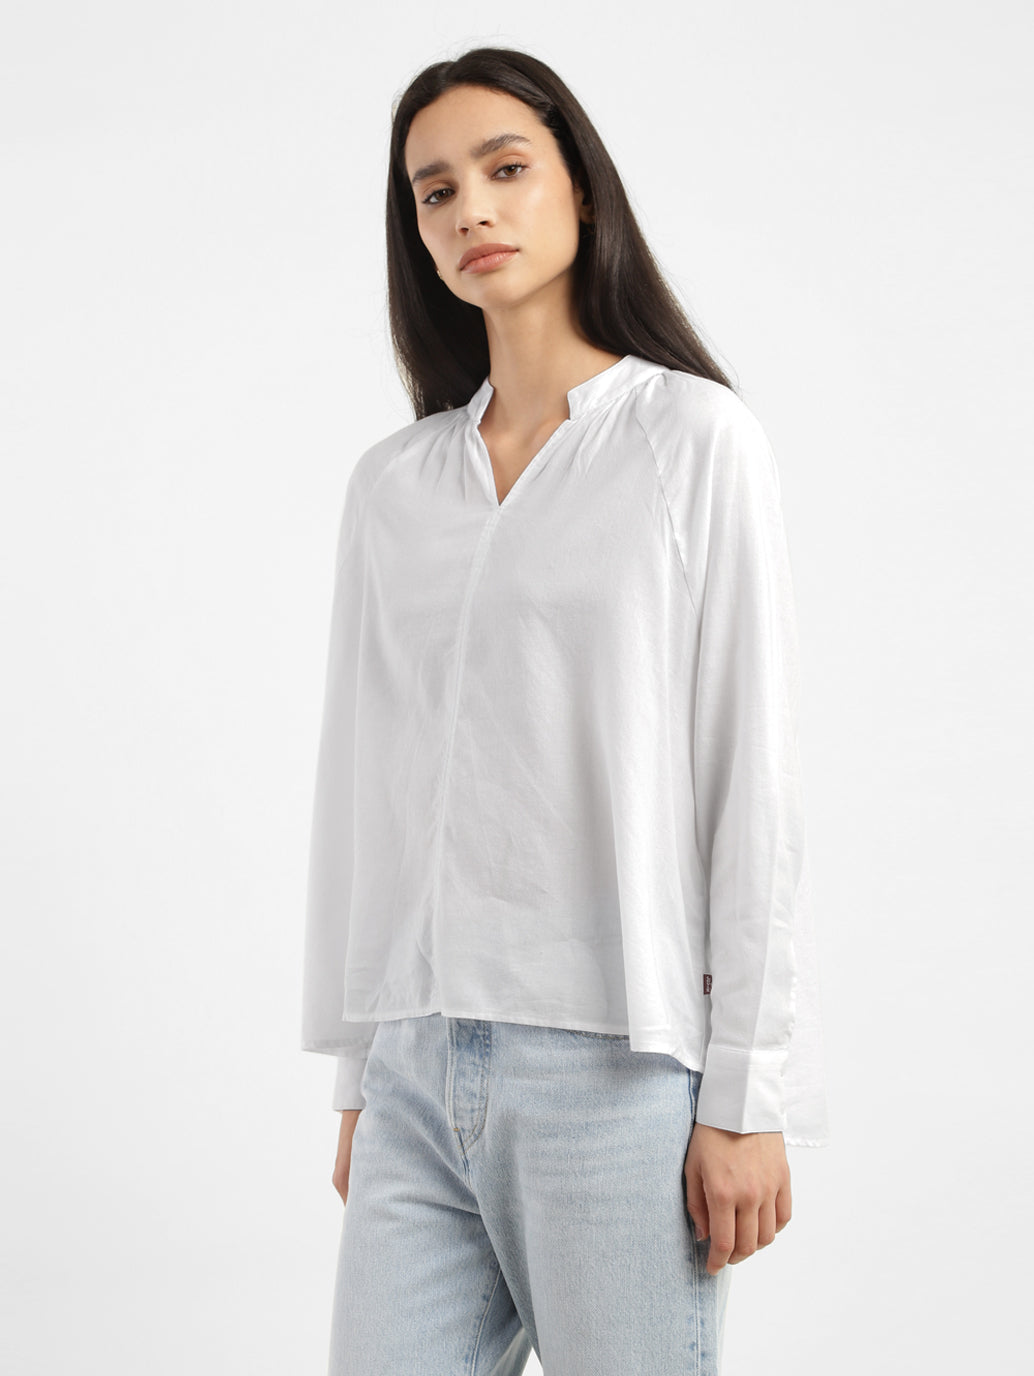 Women's Solid Band Neck Top